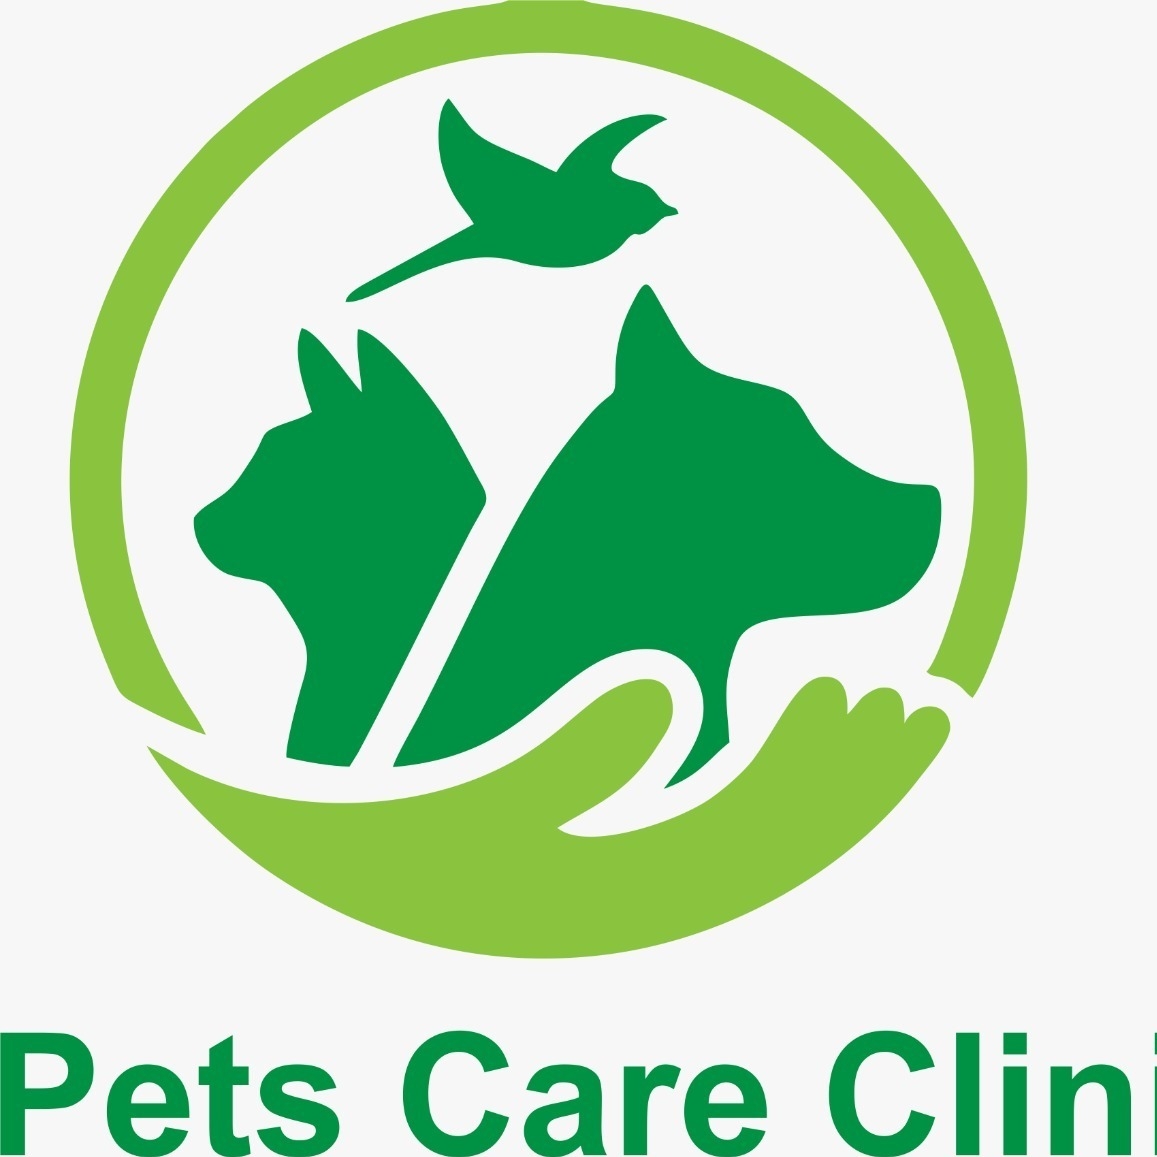 Pets Care Clinic|Hospitals|Medical Services